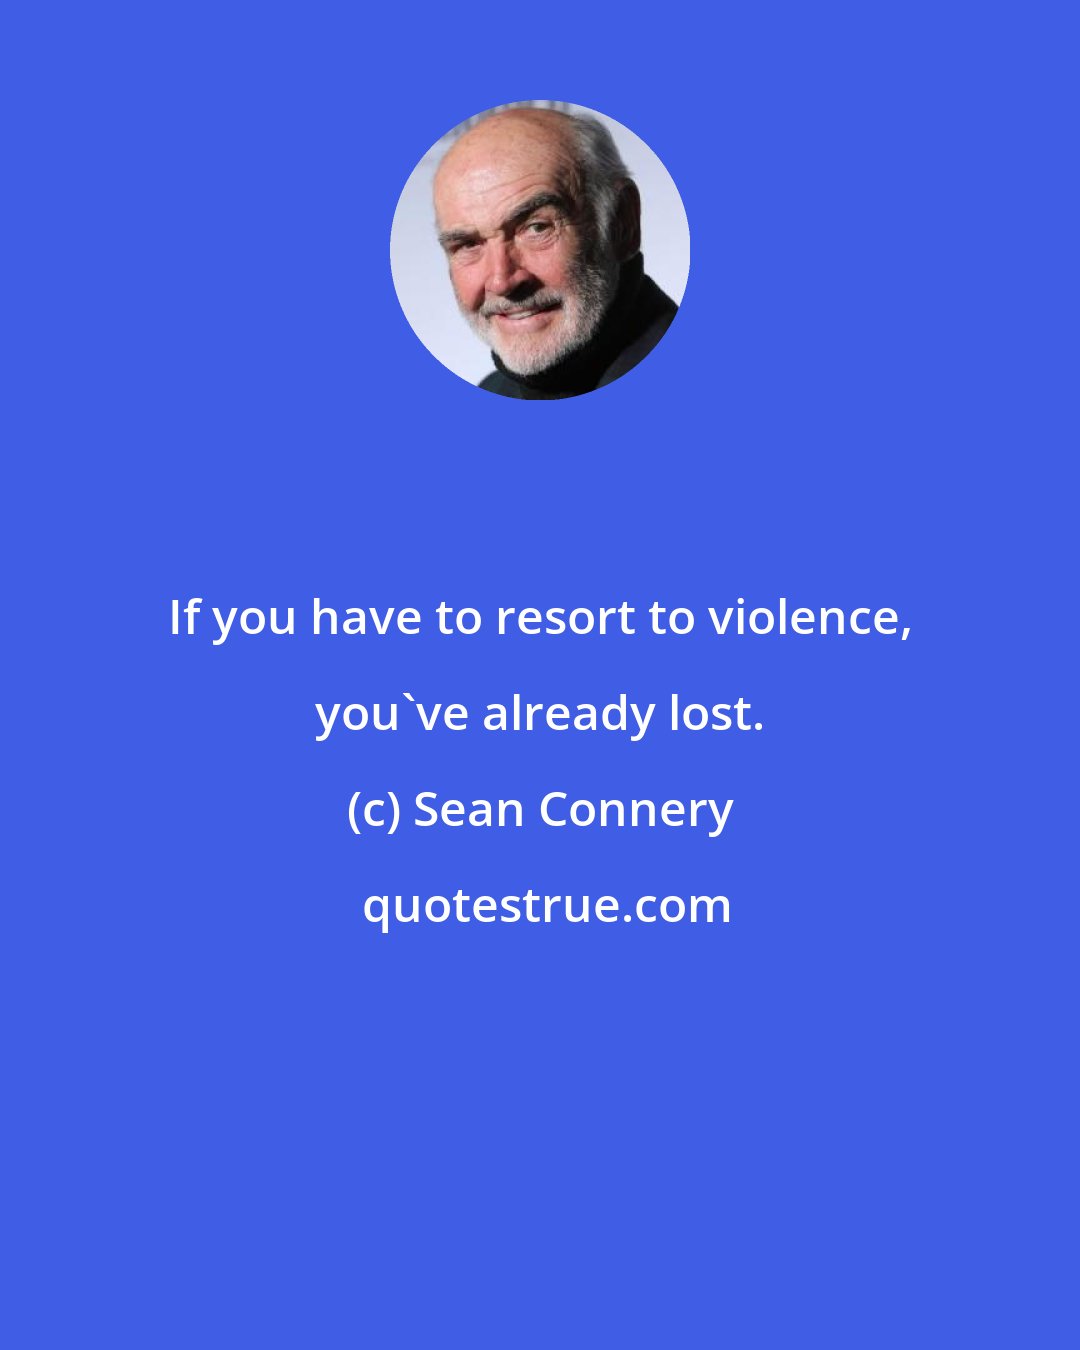 Sean Connery: If you have to resort to violence, you've already lost.